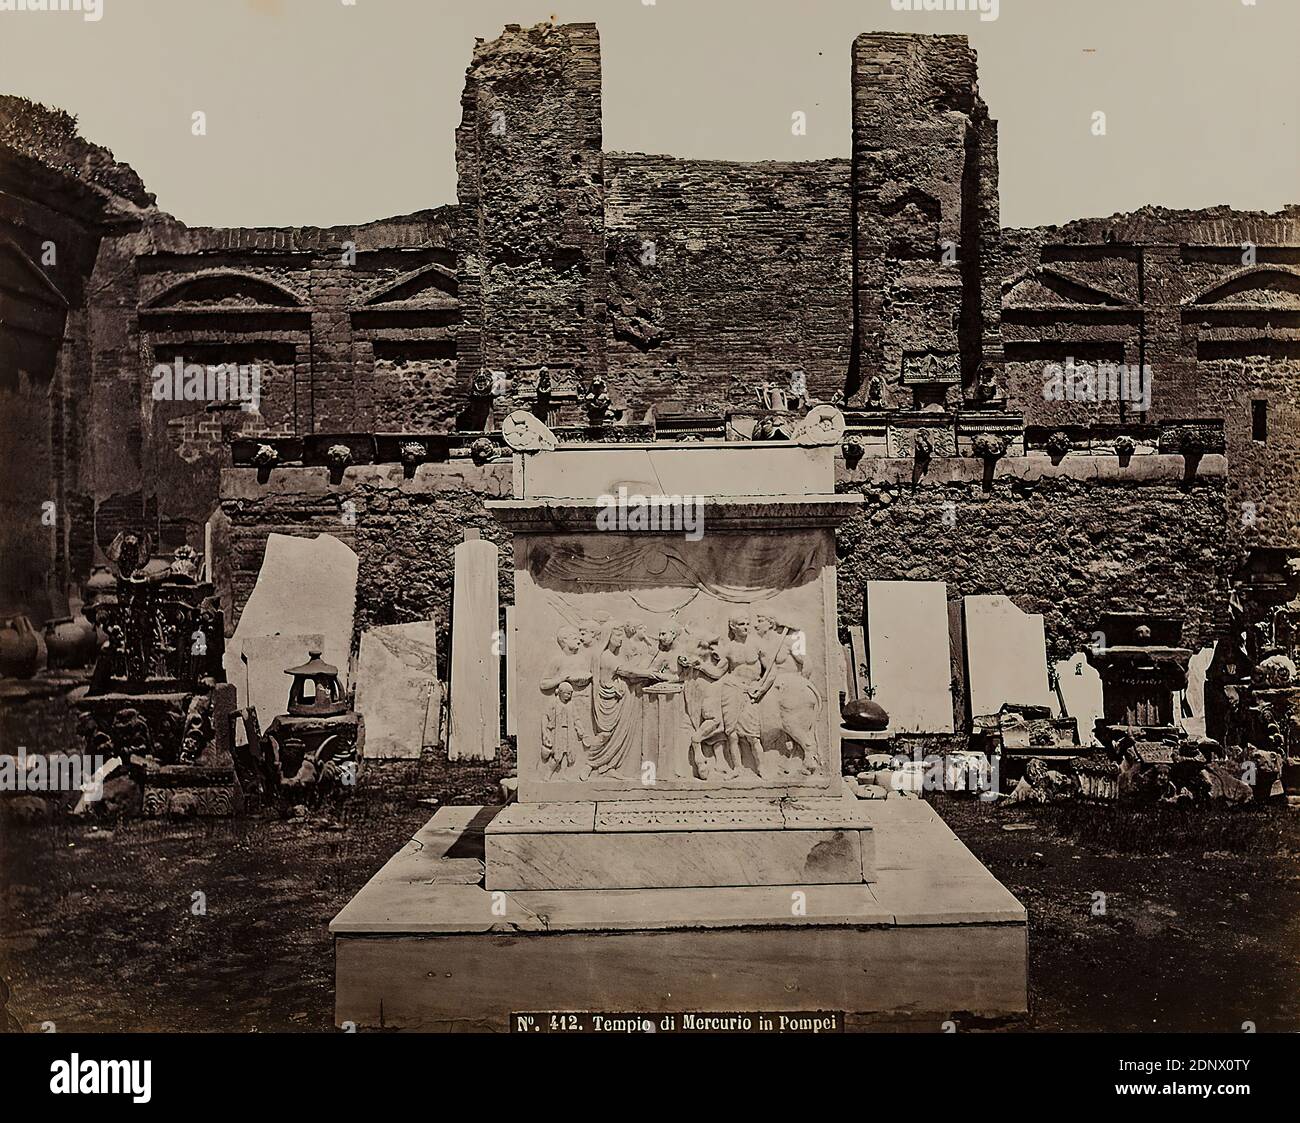 Robert Rive, Tempio di Mercurio in Pompei, albumin paper, black and white positive process, image size: height: 20 cm; width: 25,3 cm, dry stamp: recto and on the cardboard: Robert Rive, Naples, inscribed: recto and center: title, travel photography, architectural photography, ruins, temples and sanctuaries (roman religion), hist. Building, locality, street, archaeological excavation, classical-ancient history, sculpture, plastic, sculpture art Stock Photo